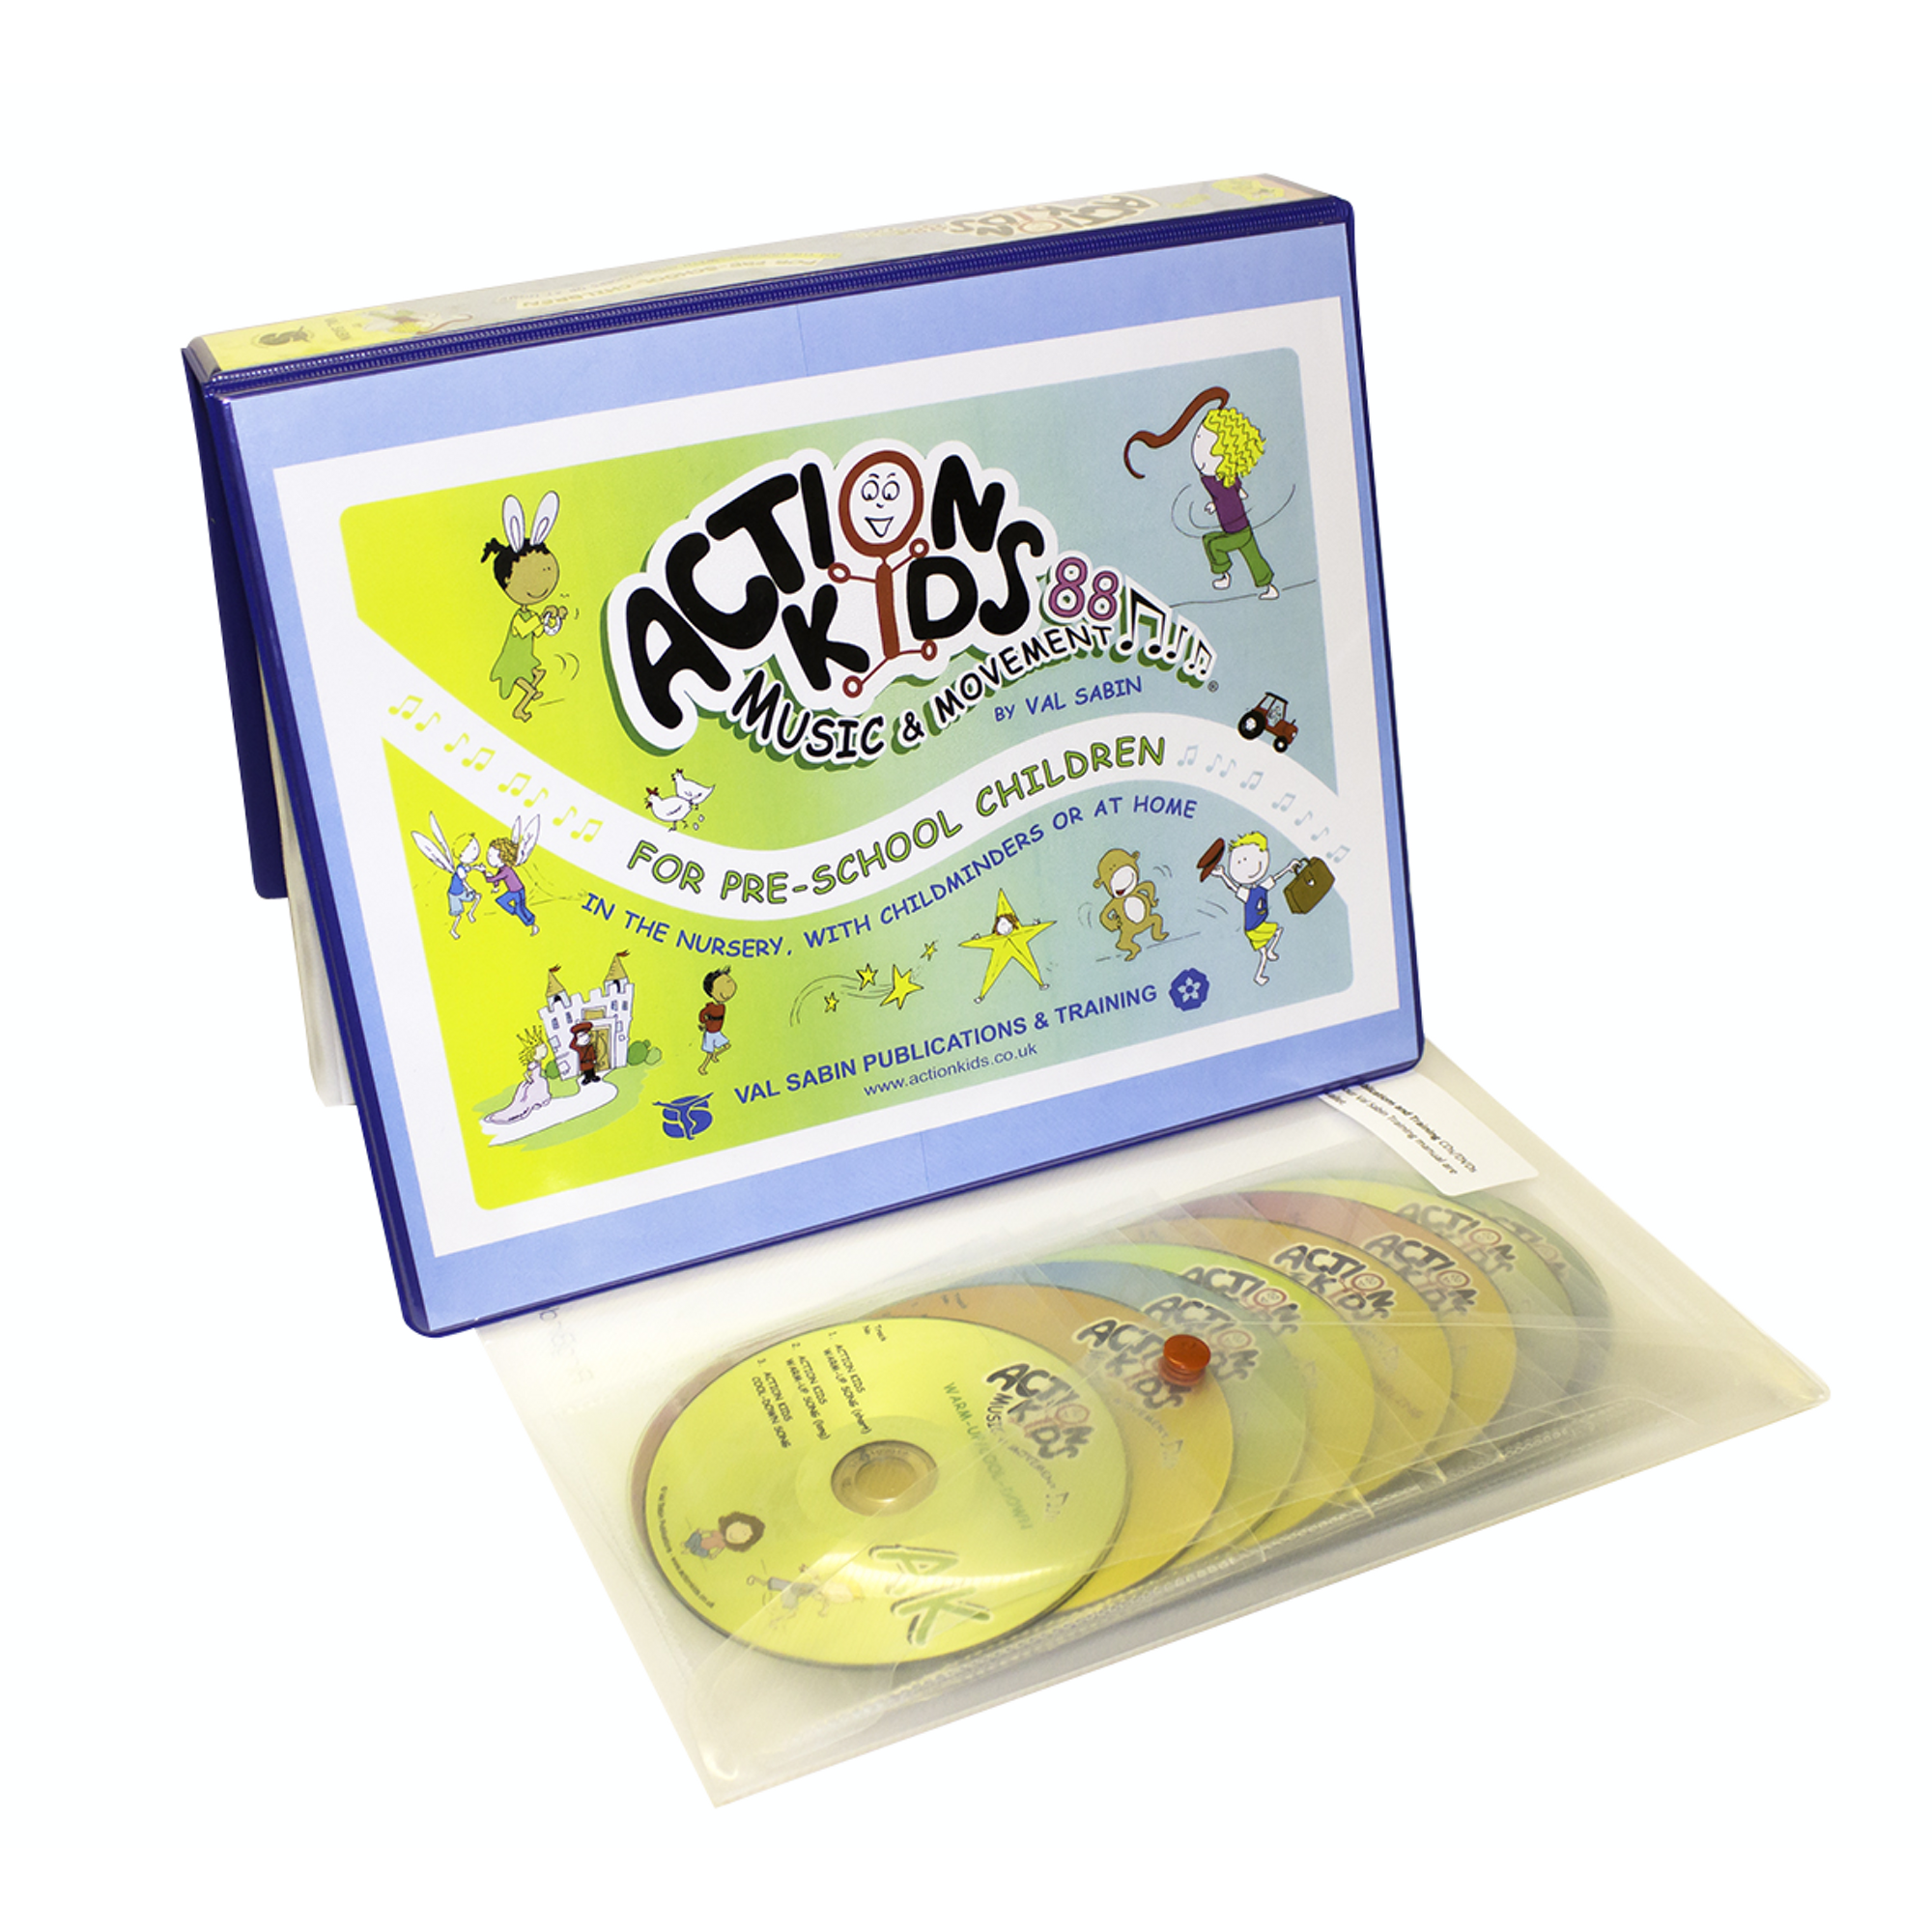 Action Kids 88 Movement Music Cards Cd